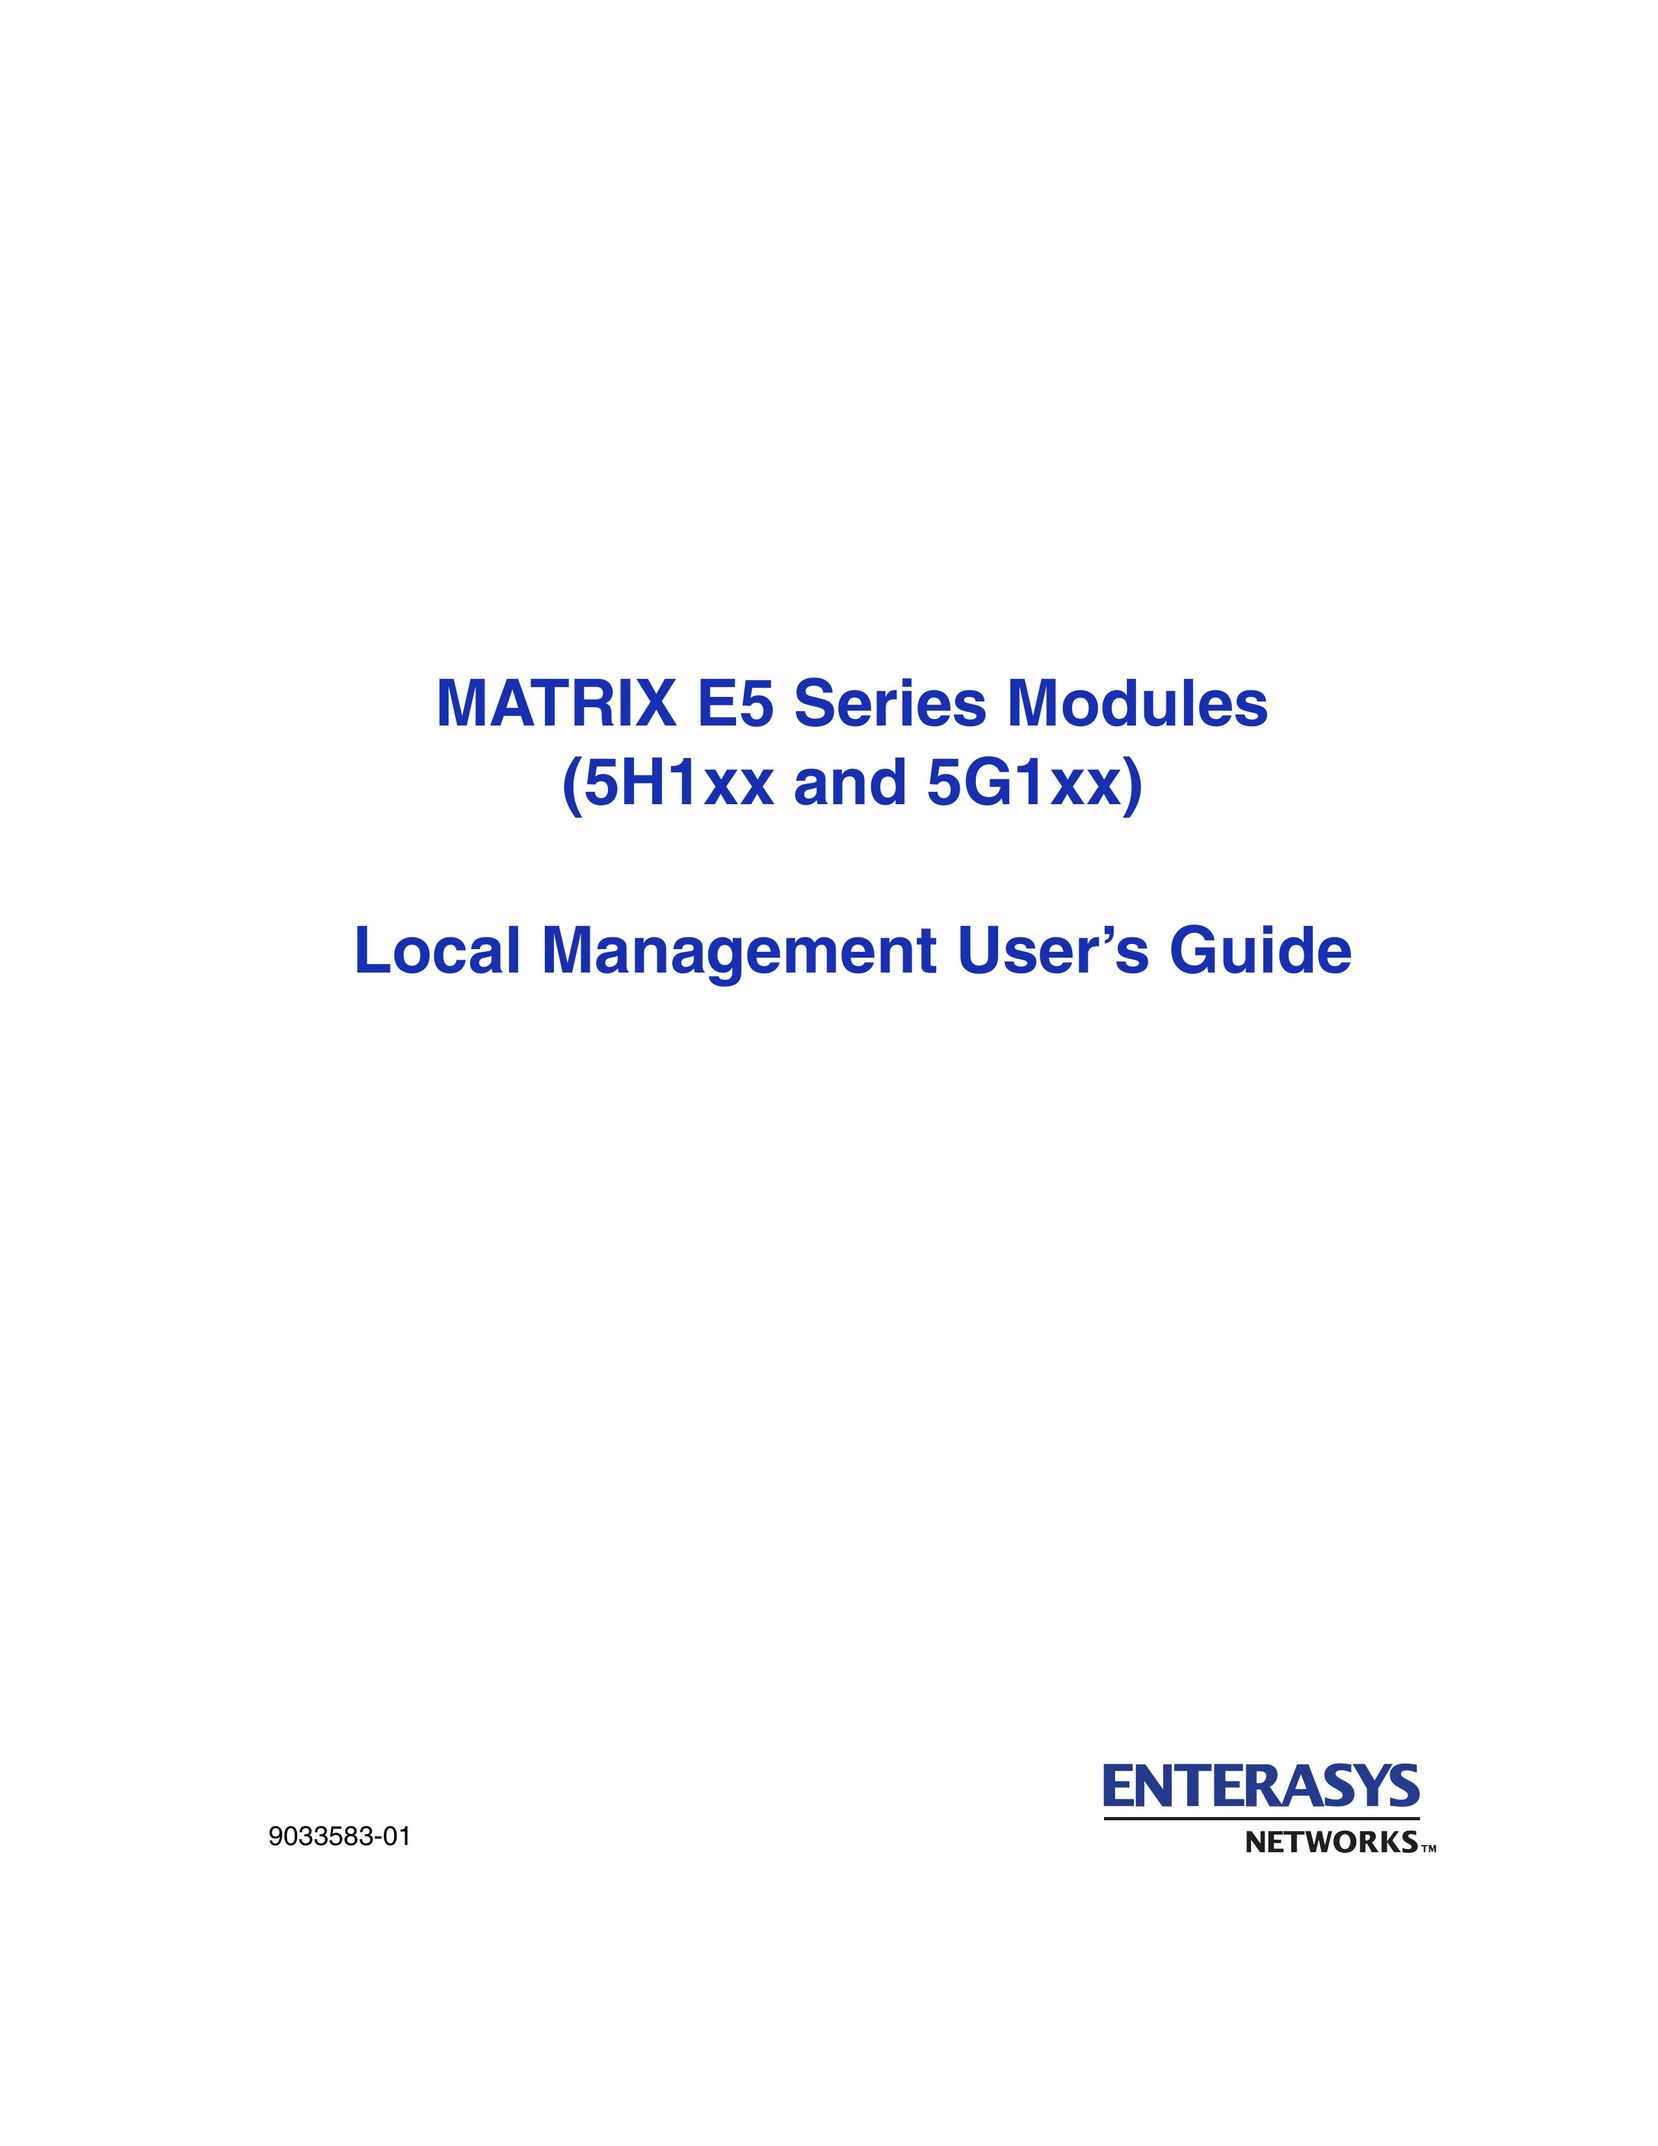 Enterasys Networks 5H1XX Switch User Manual